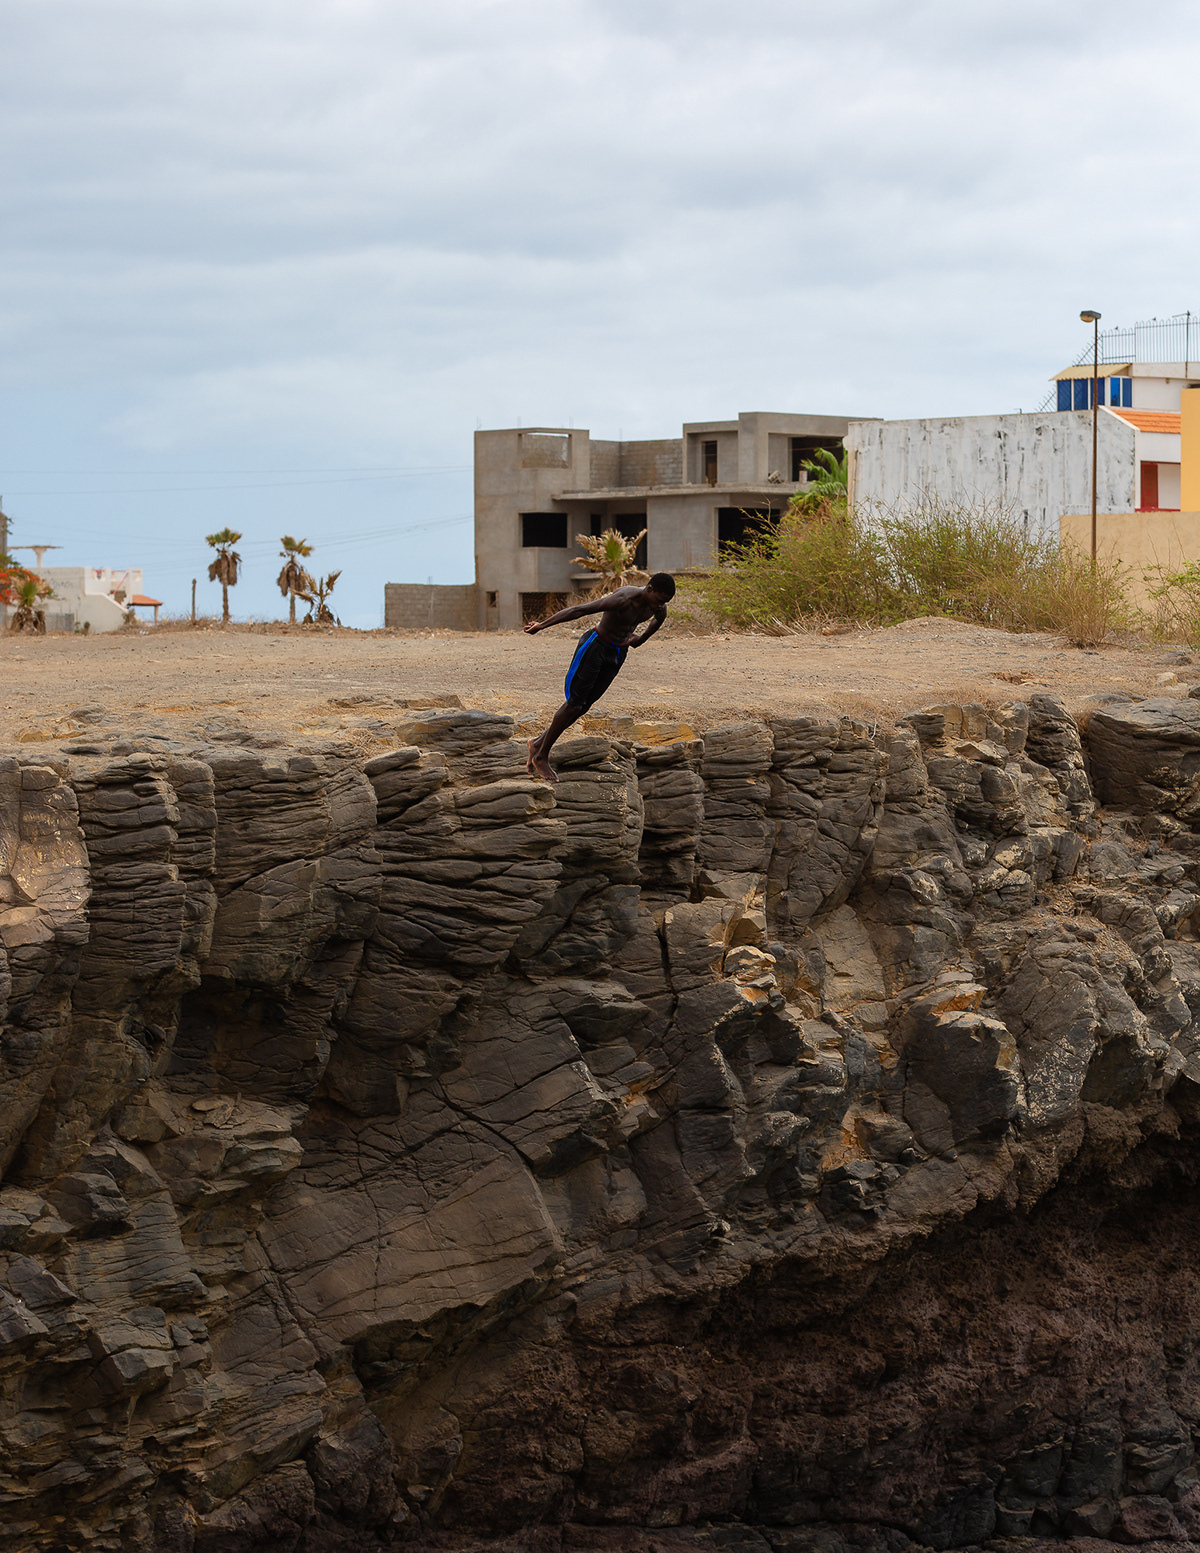 cabo verde cape verde africa street photography editorial